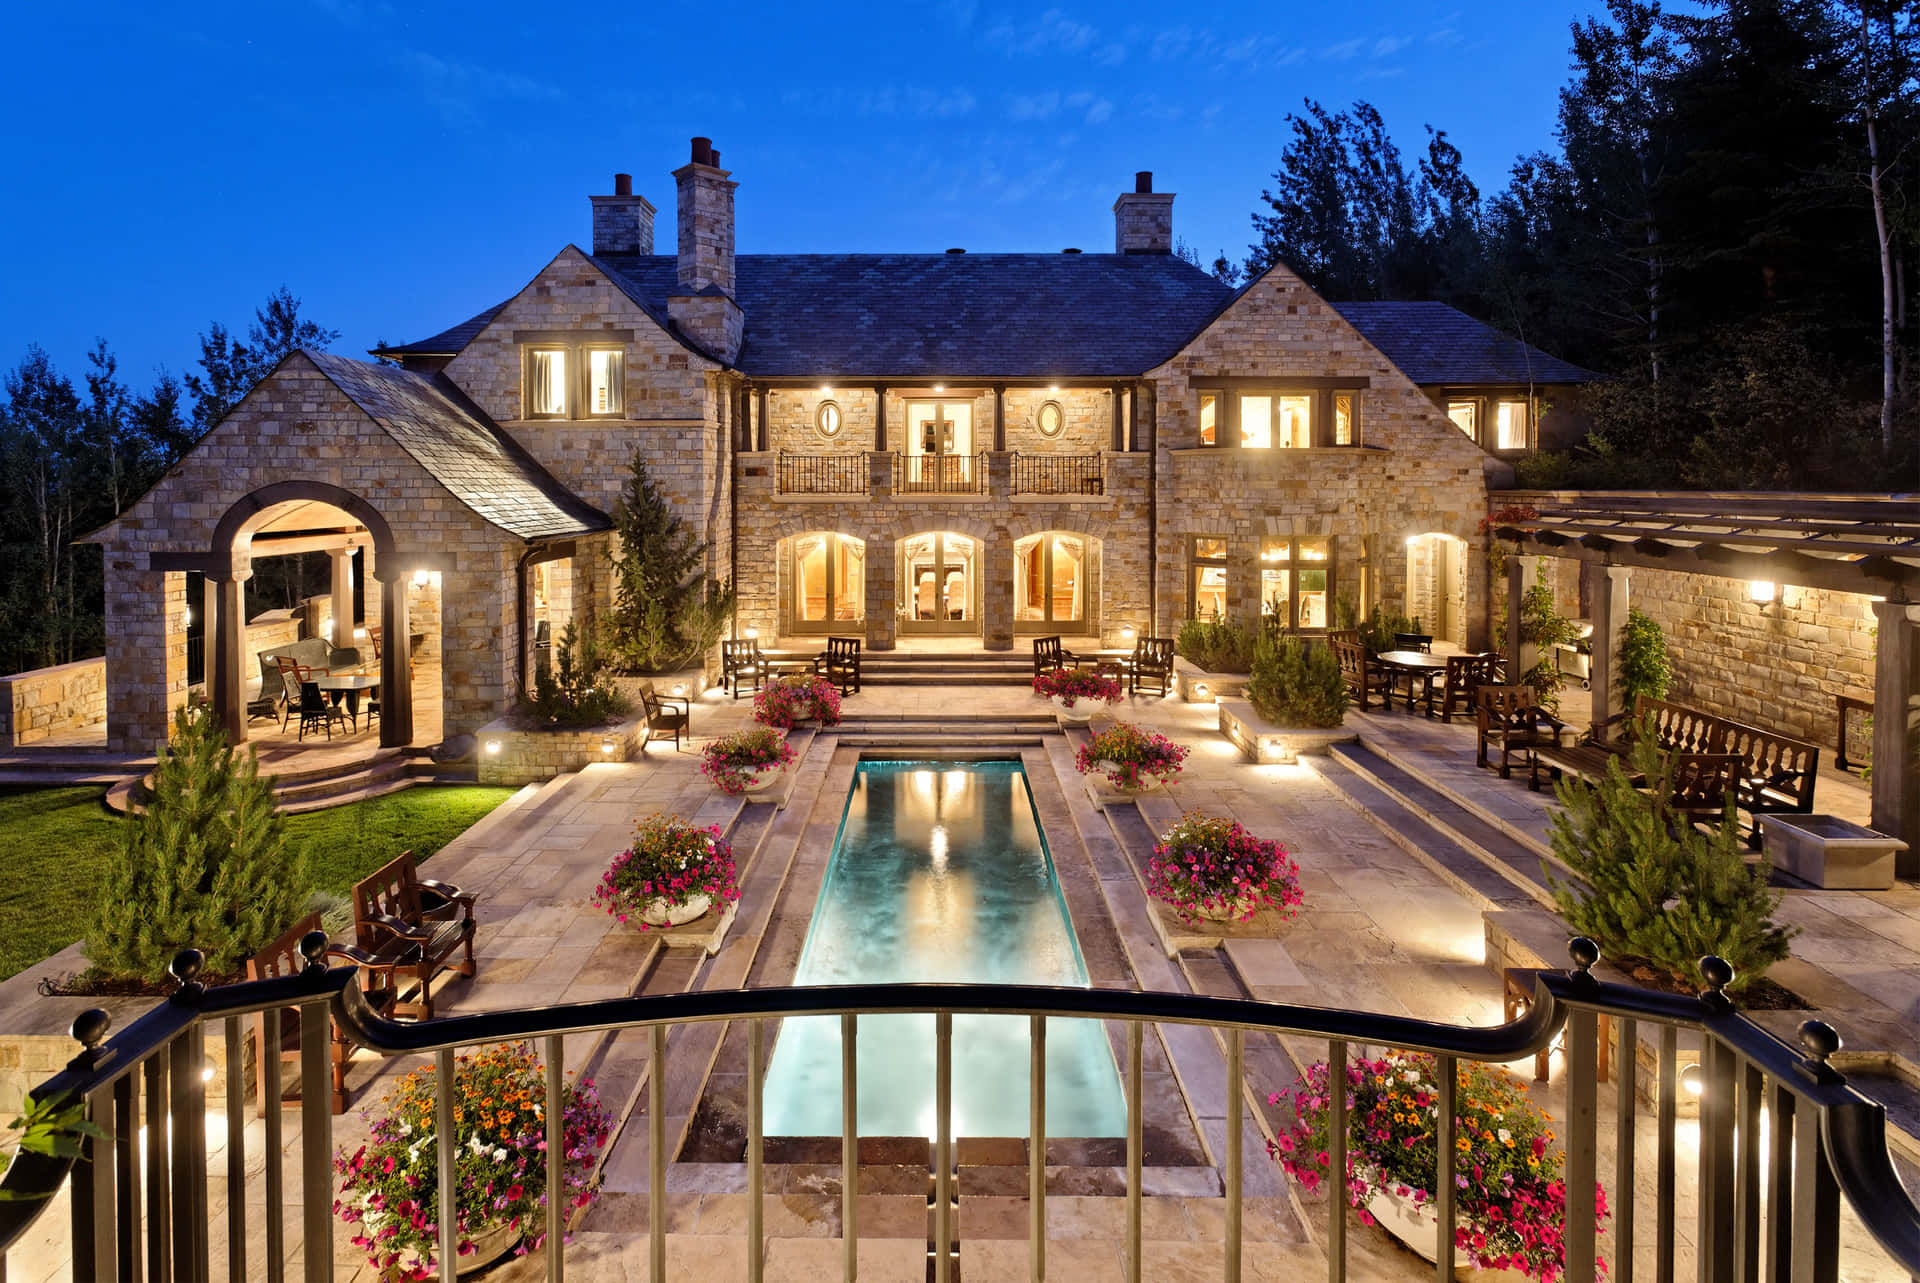 A Large Stone House With A Pool And Patio